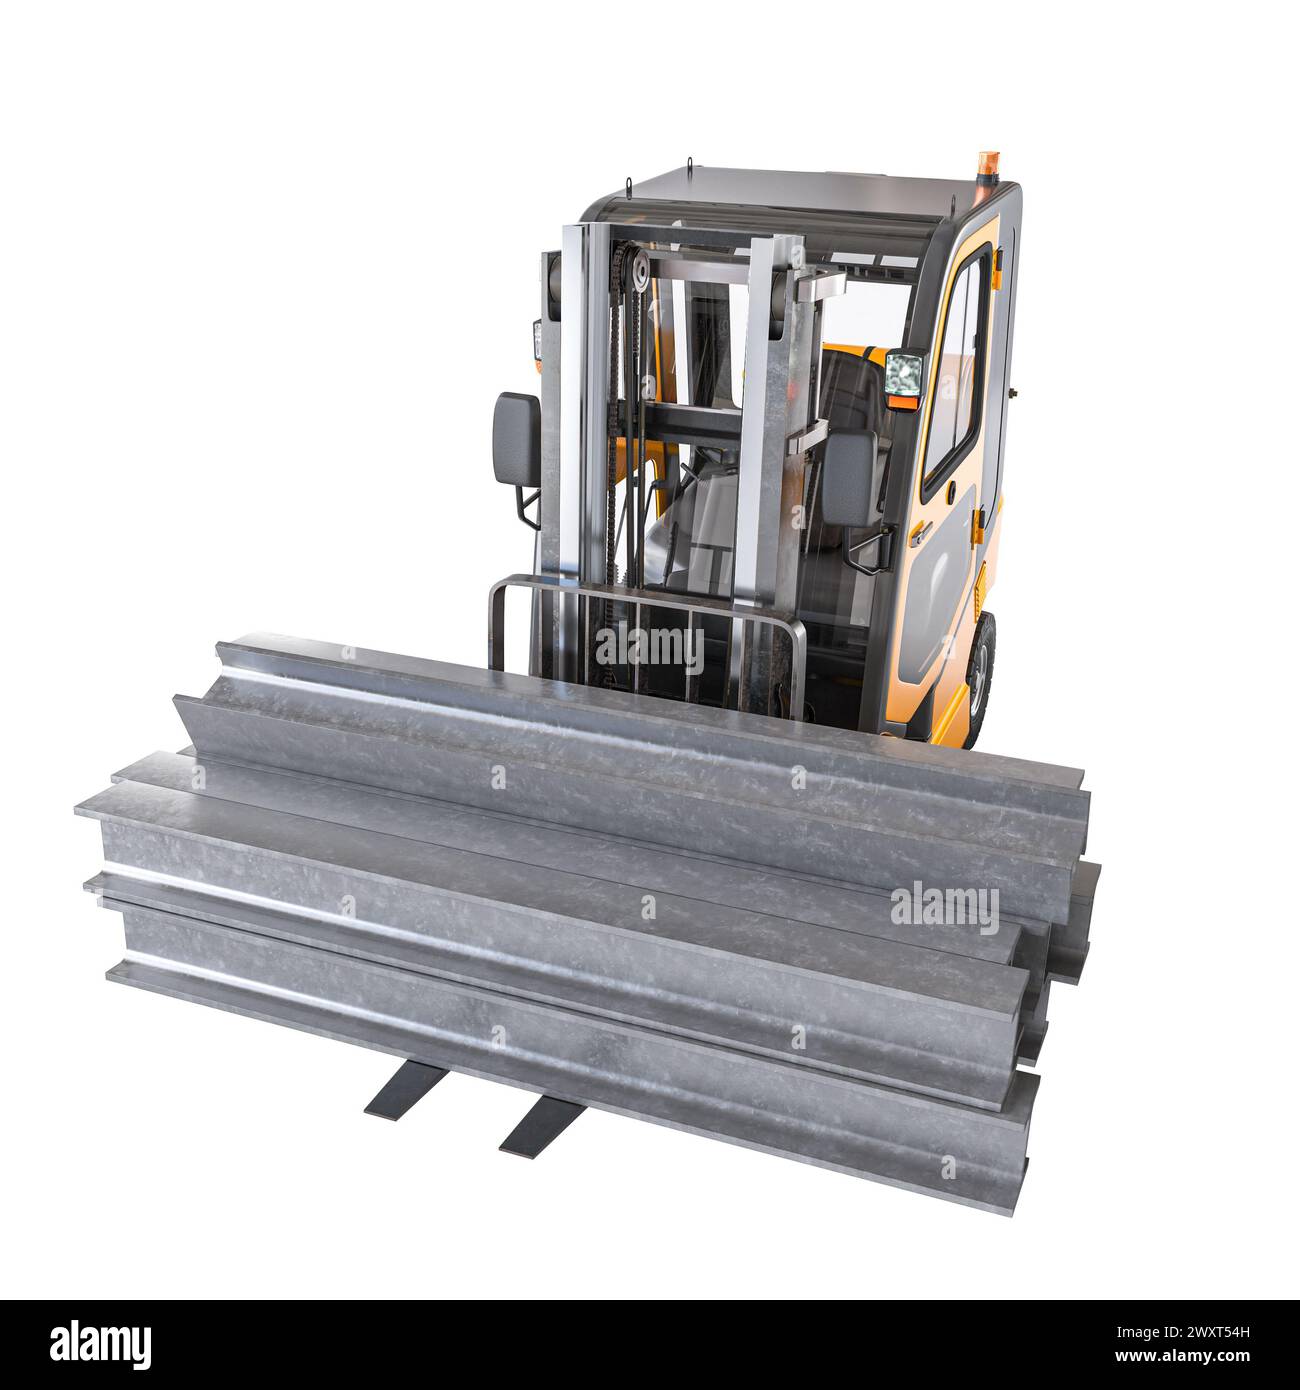 3d rendered image of a forklift truck preparing to move heavy steel beams Stock Photo